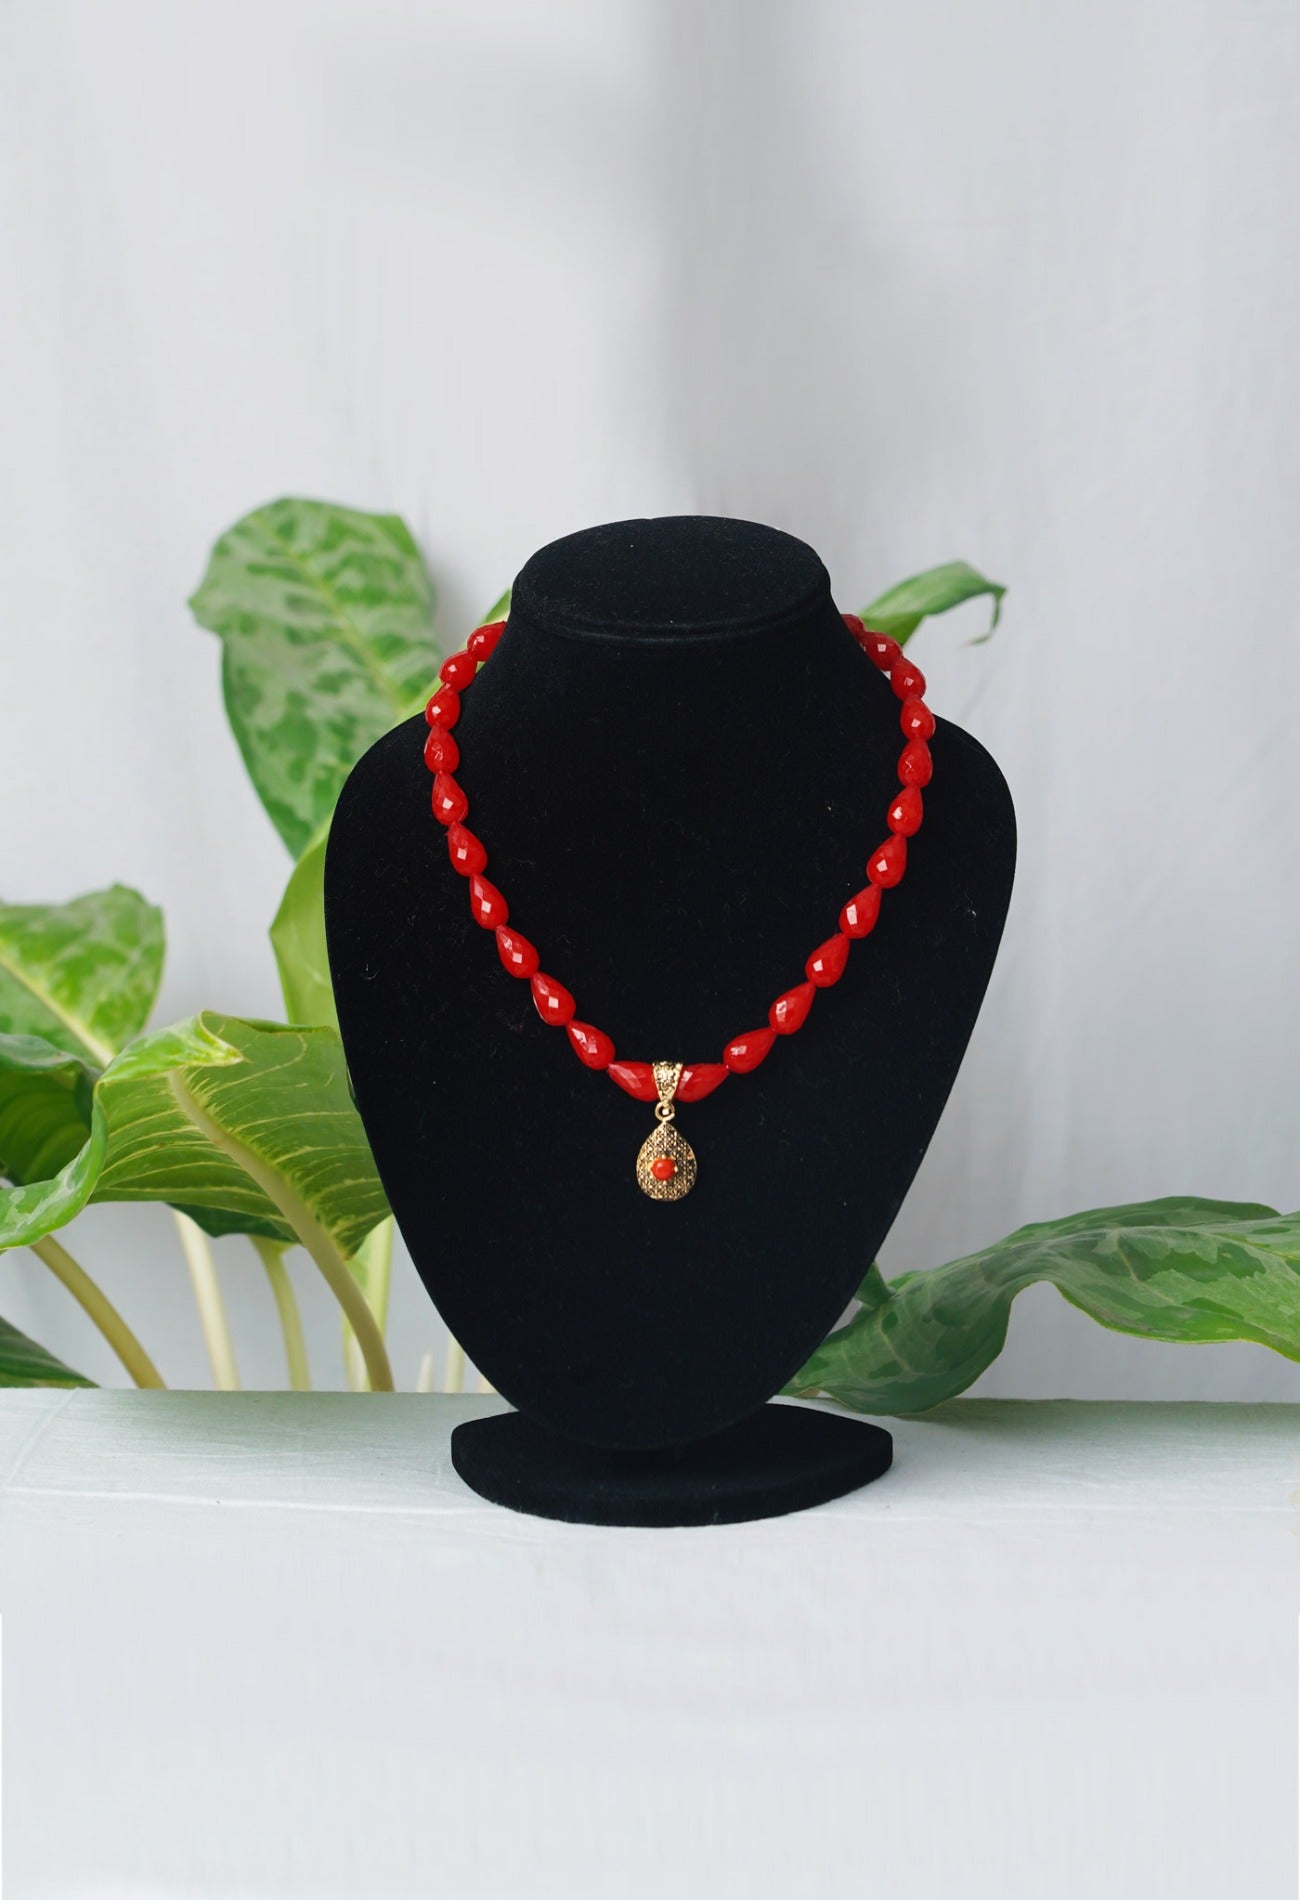 Online Shopping for Red Amravati Oval Long Pearl Beads with Pendent with jewellery from Andhra Pradesh at Unnatisilks.com India
